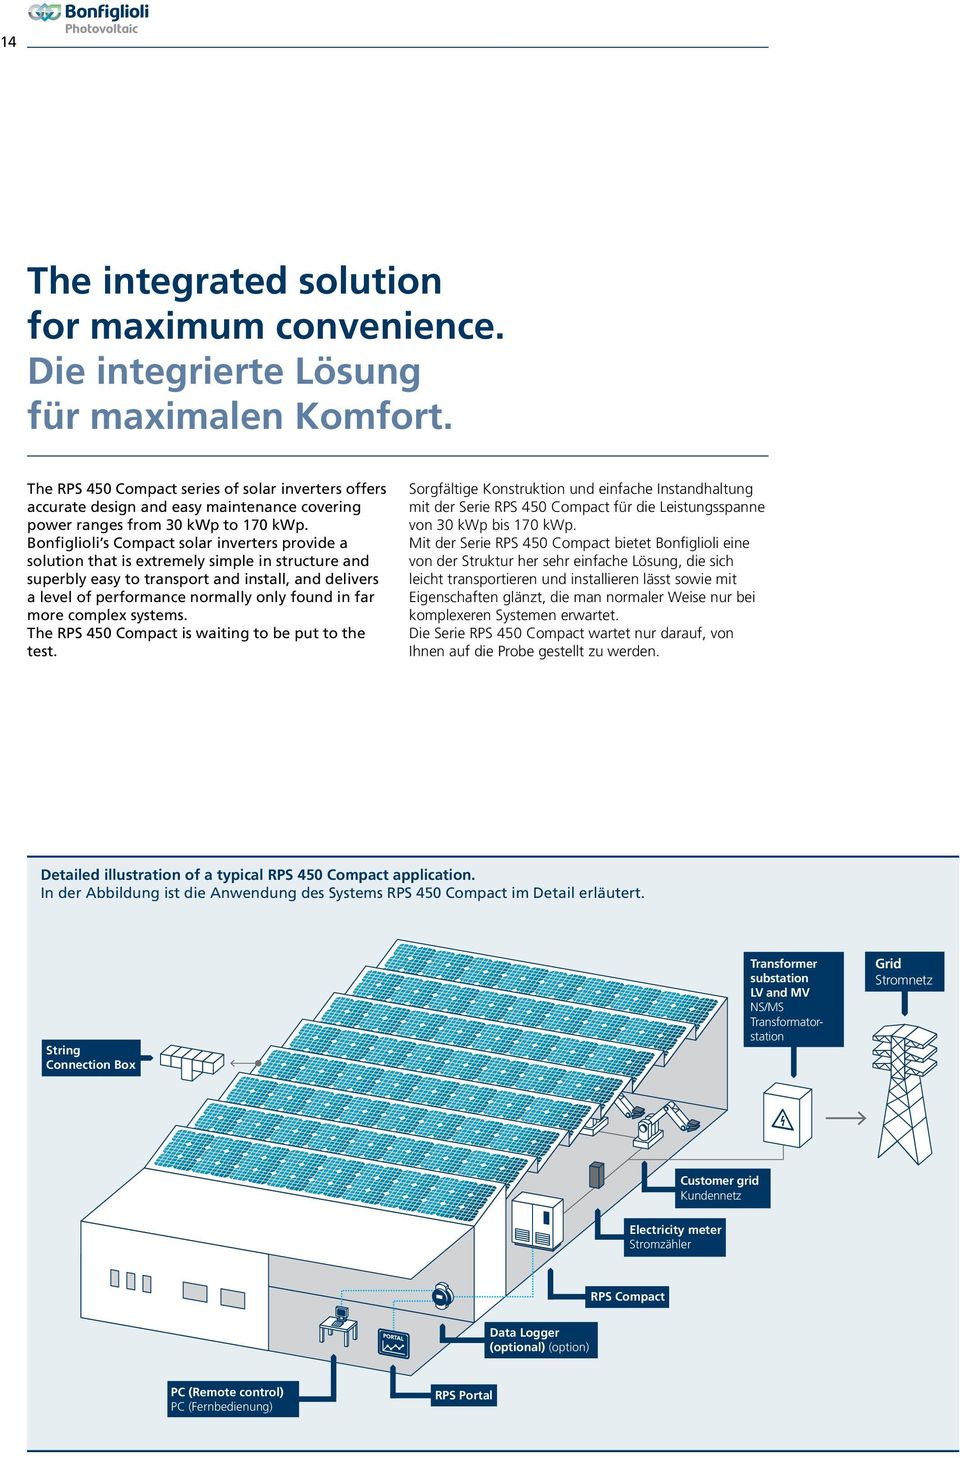 Bonfiglioli s Compact solar inverters provide a solution that is extremely simple in structure and superbly easy to transport and install, and delivers a level of performance normally only found in